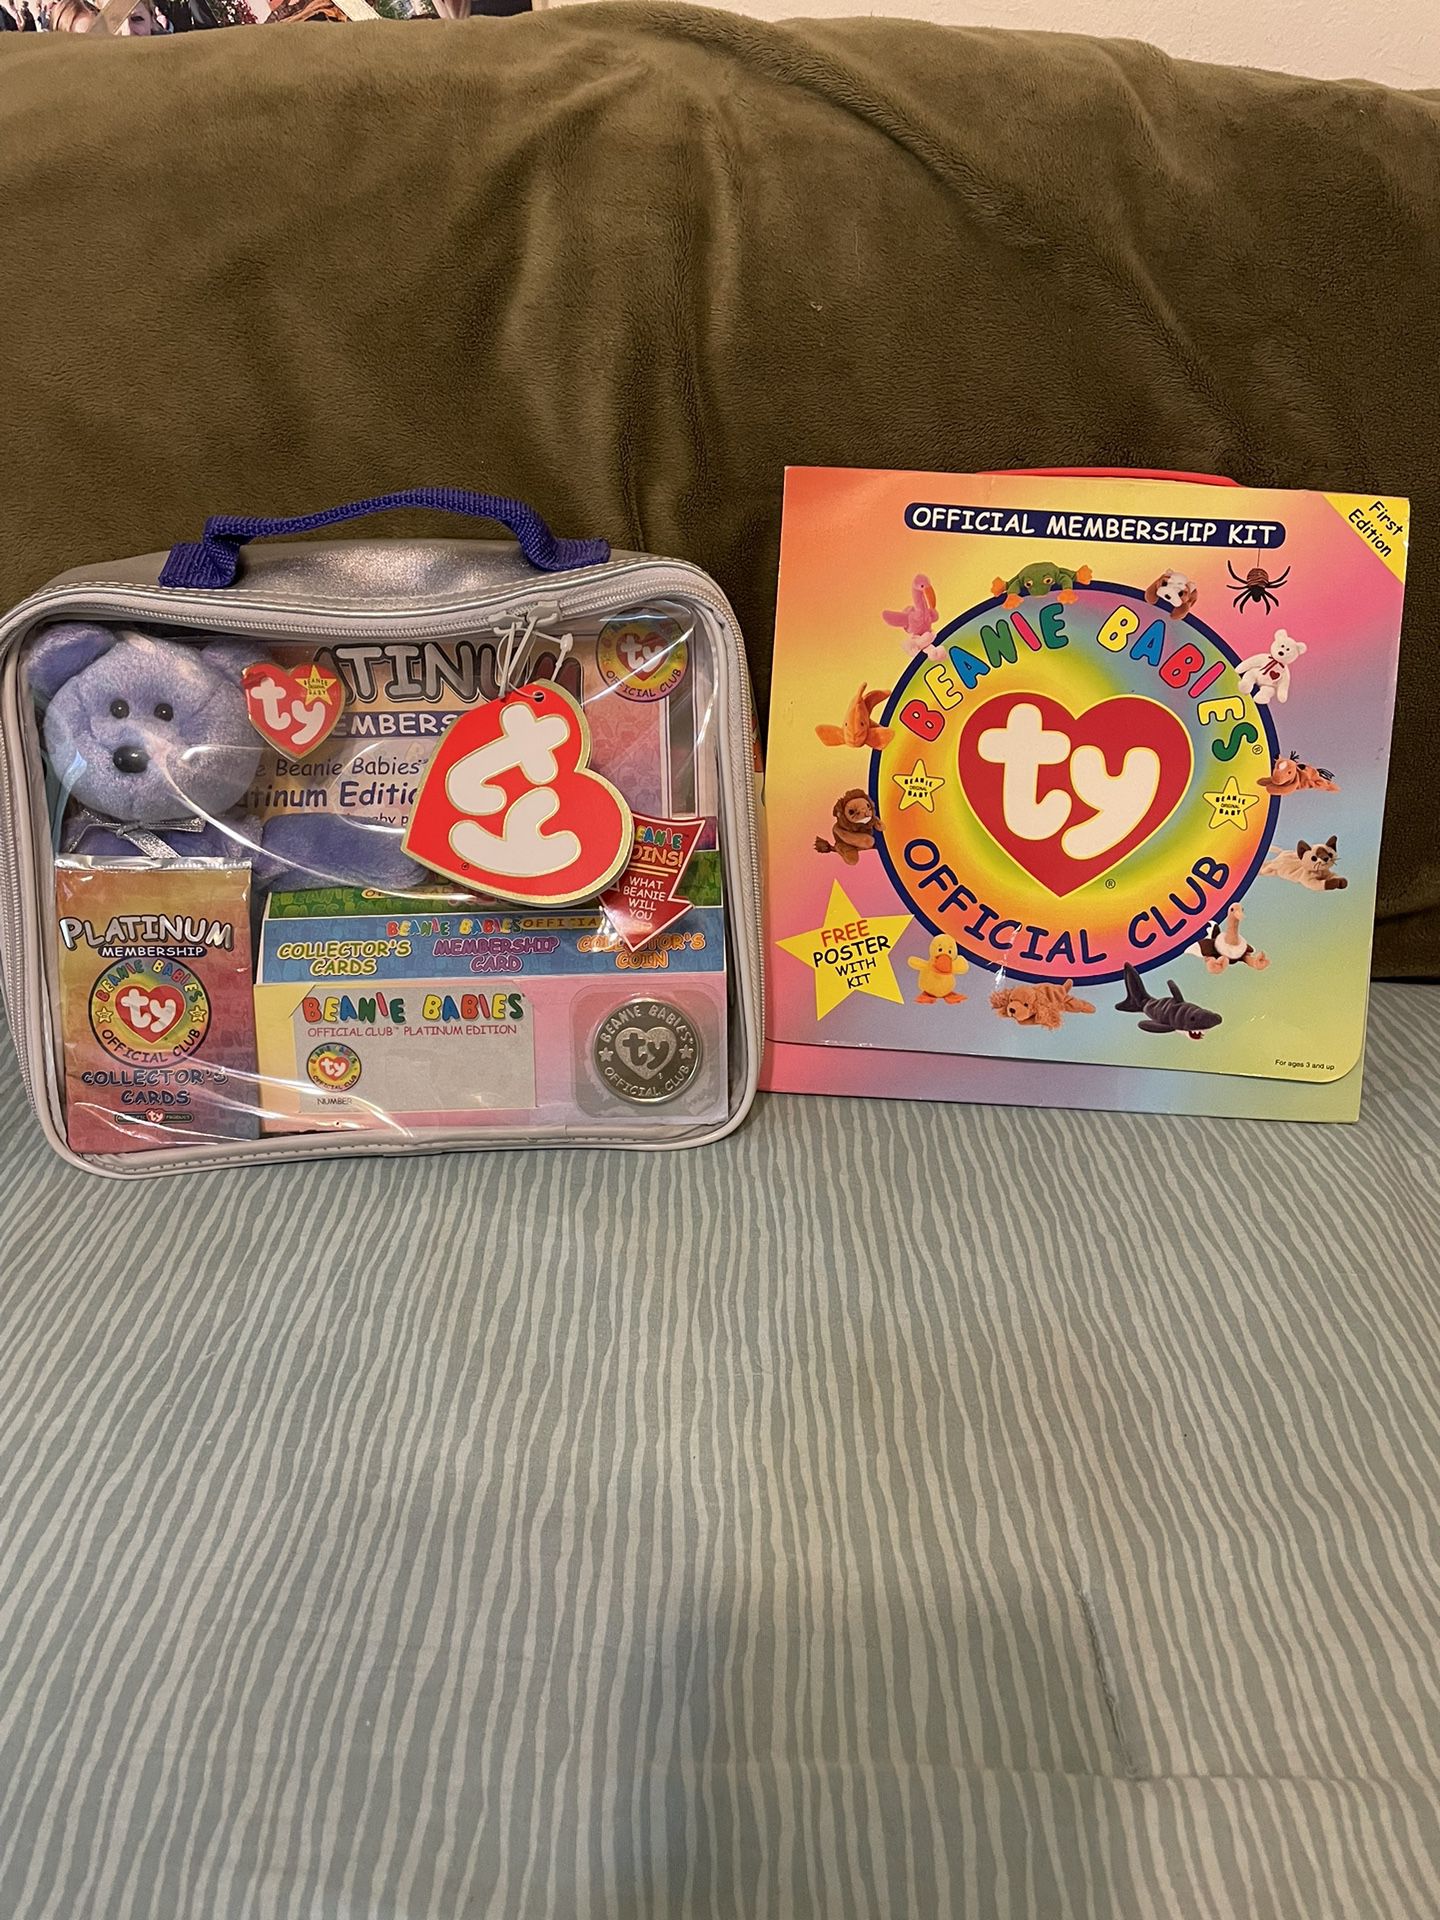 Beanie Babies, Official Club Case And Membership Kit